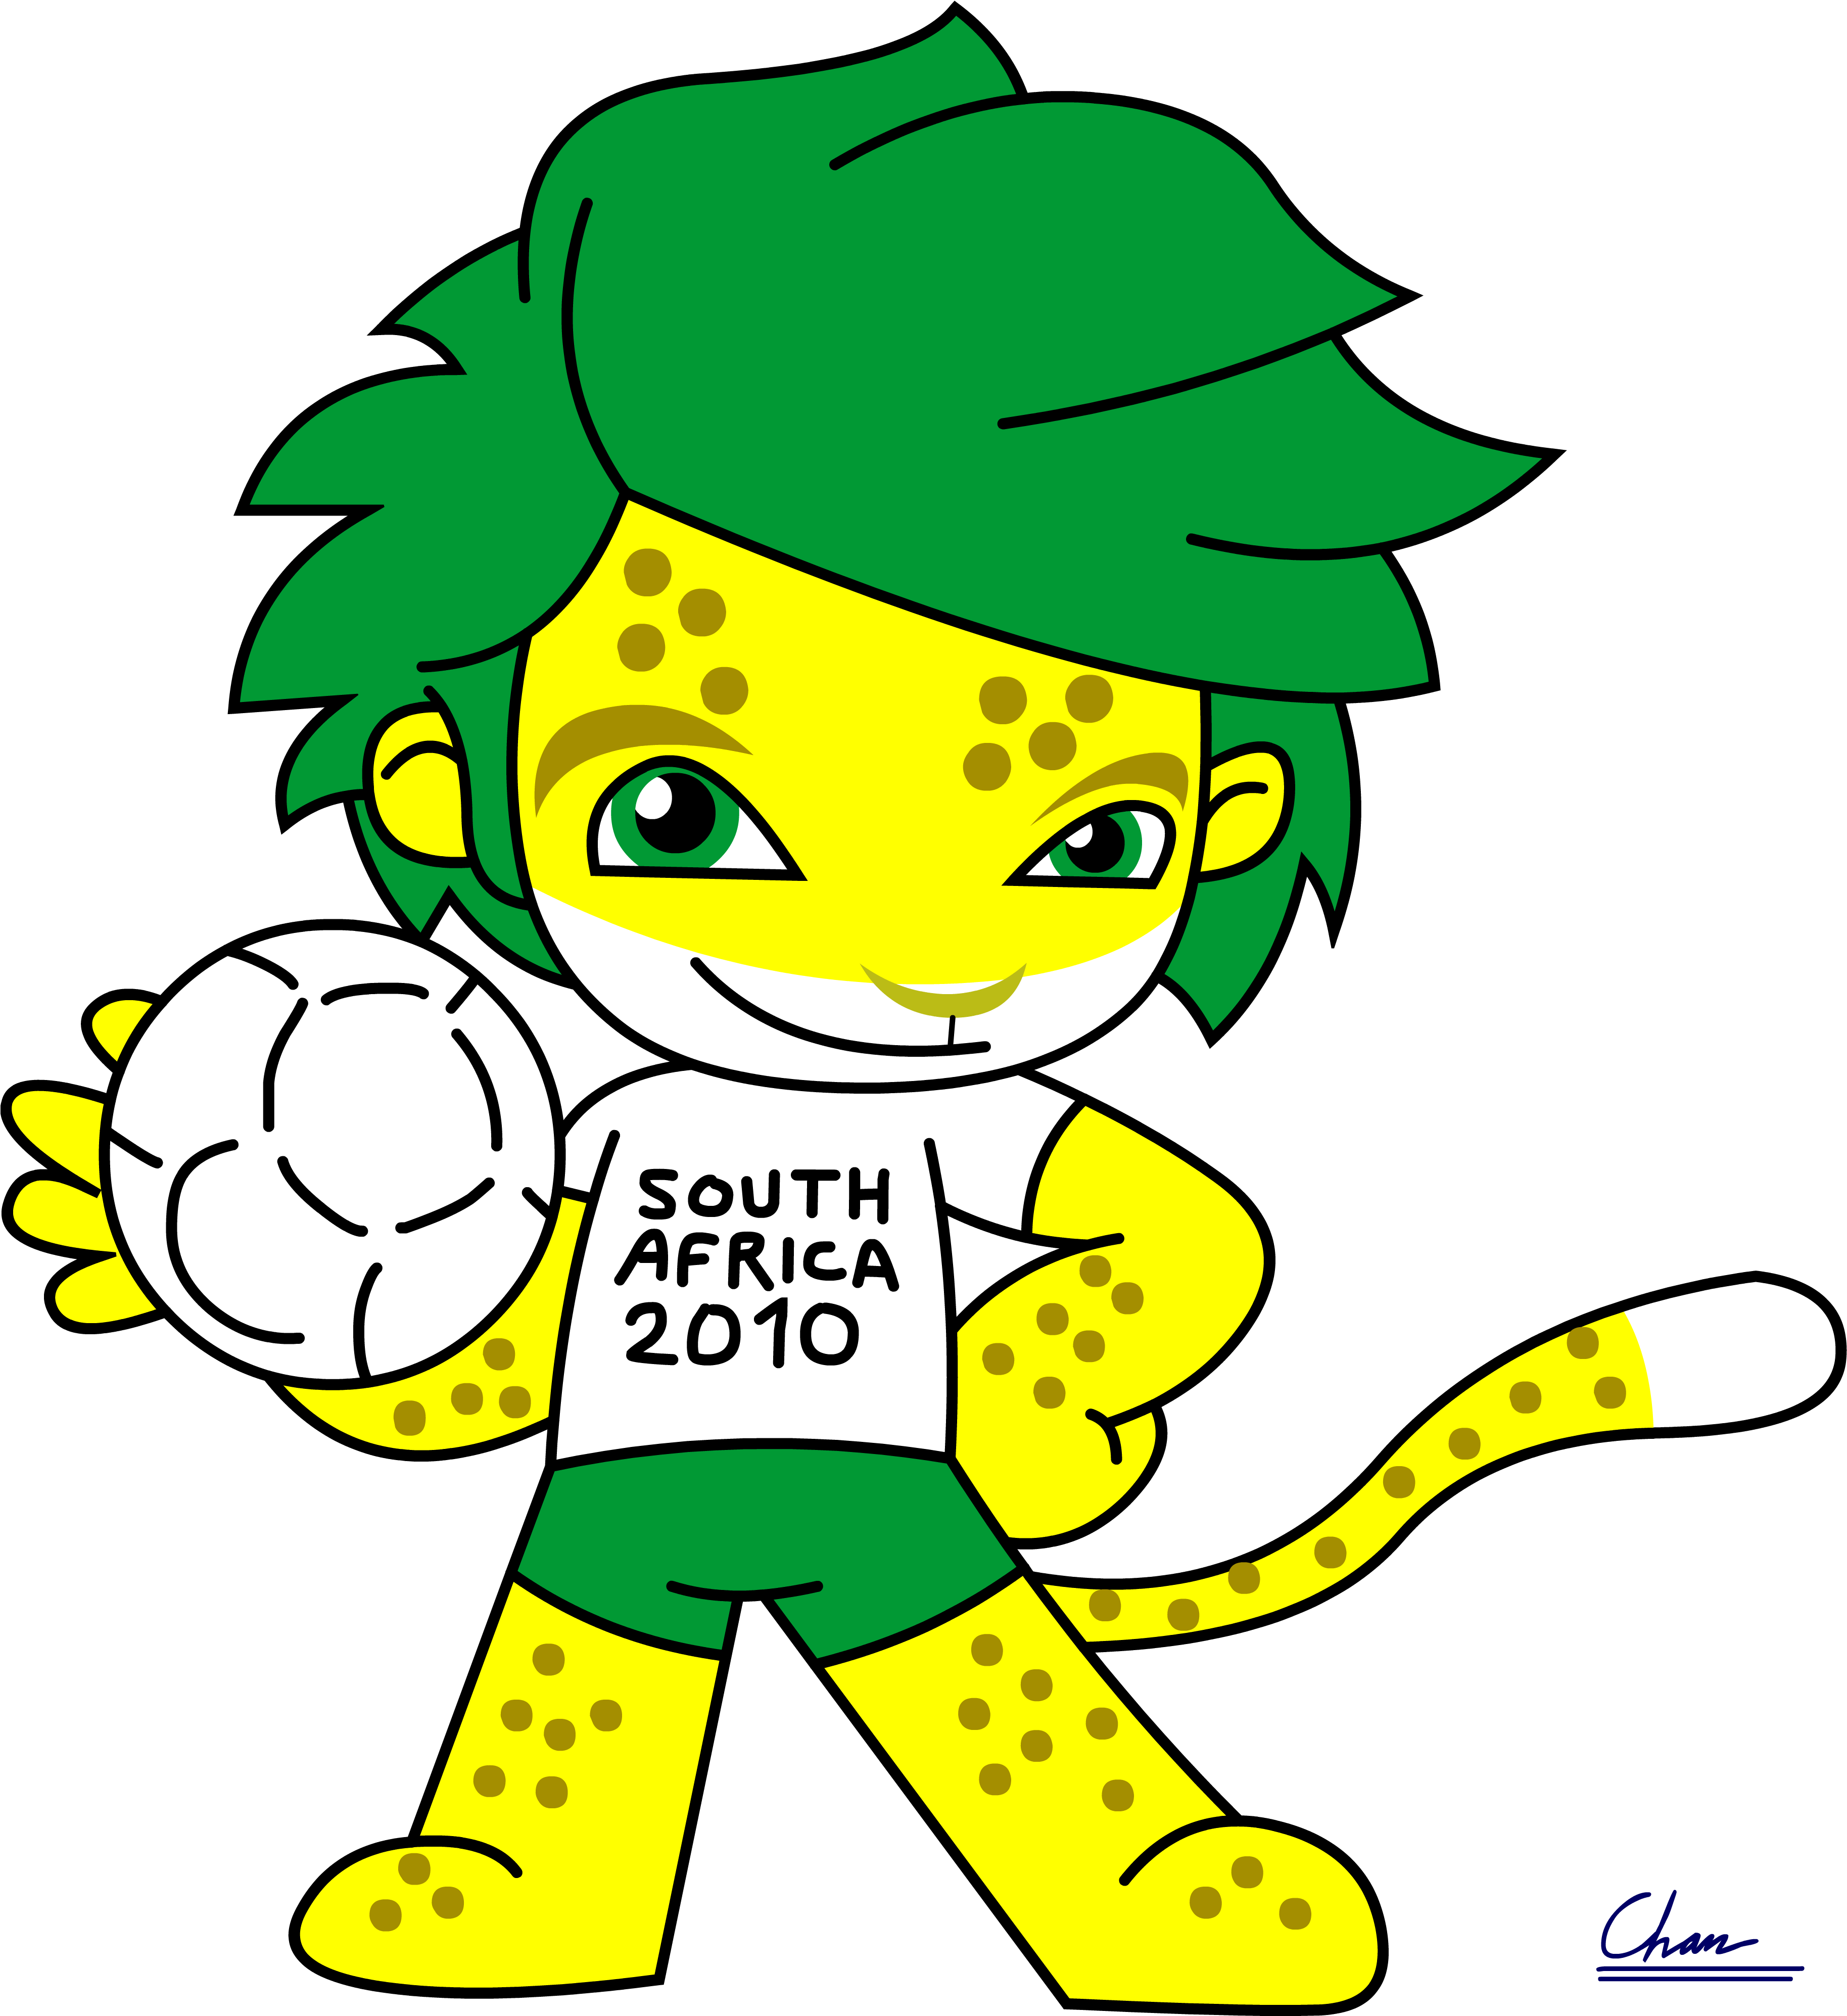 I'm Not Lion' I Love This Mascot - Fifa World Cup 2010 (3665x4000)